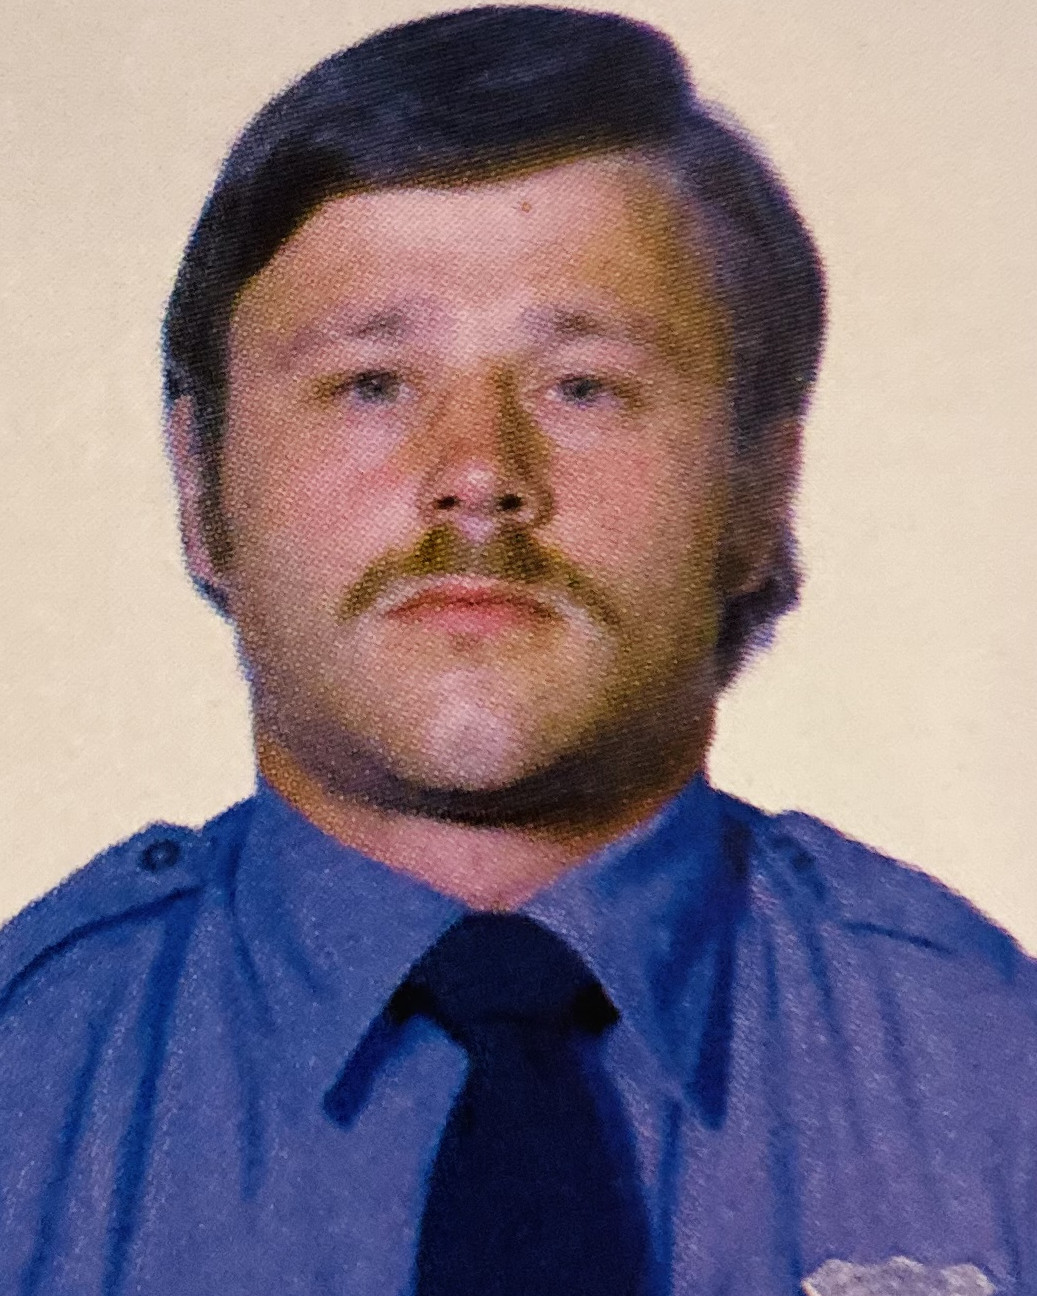 Police Officer Michael D. Russell | New York City Police Department, New York